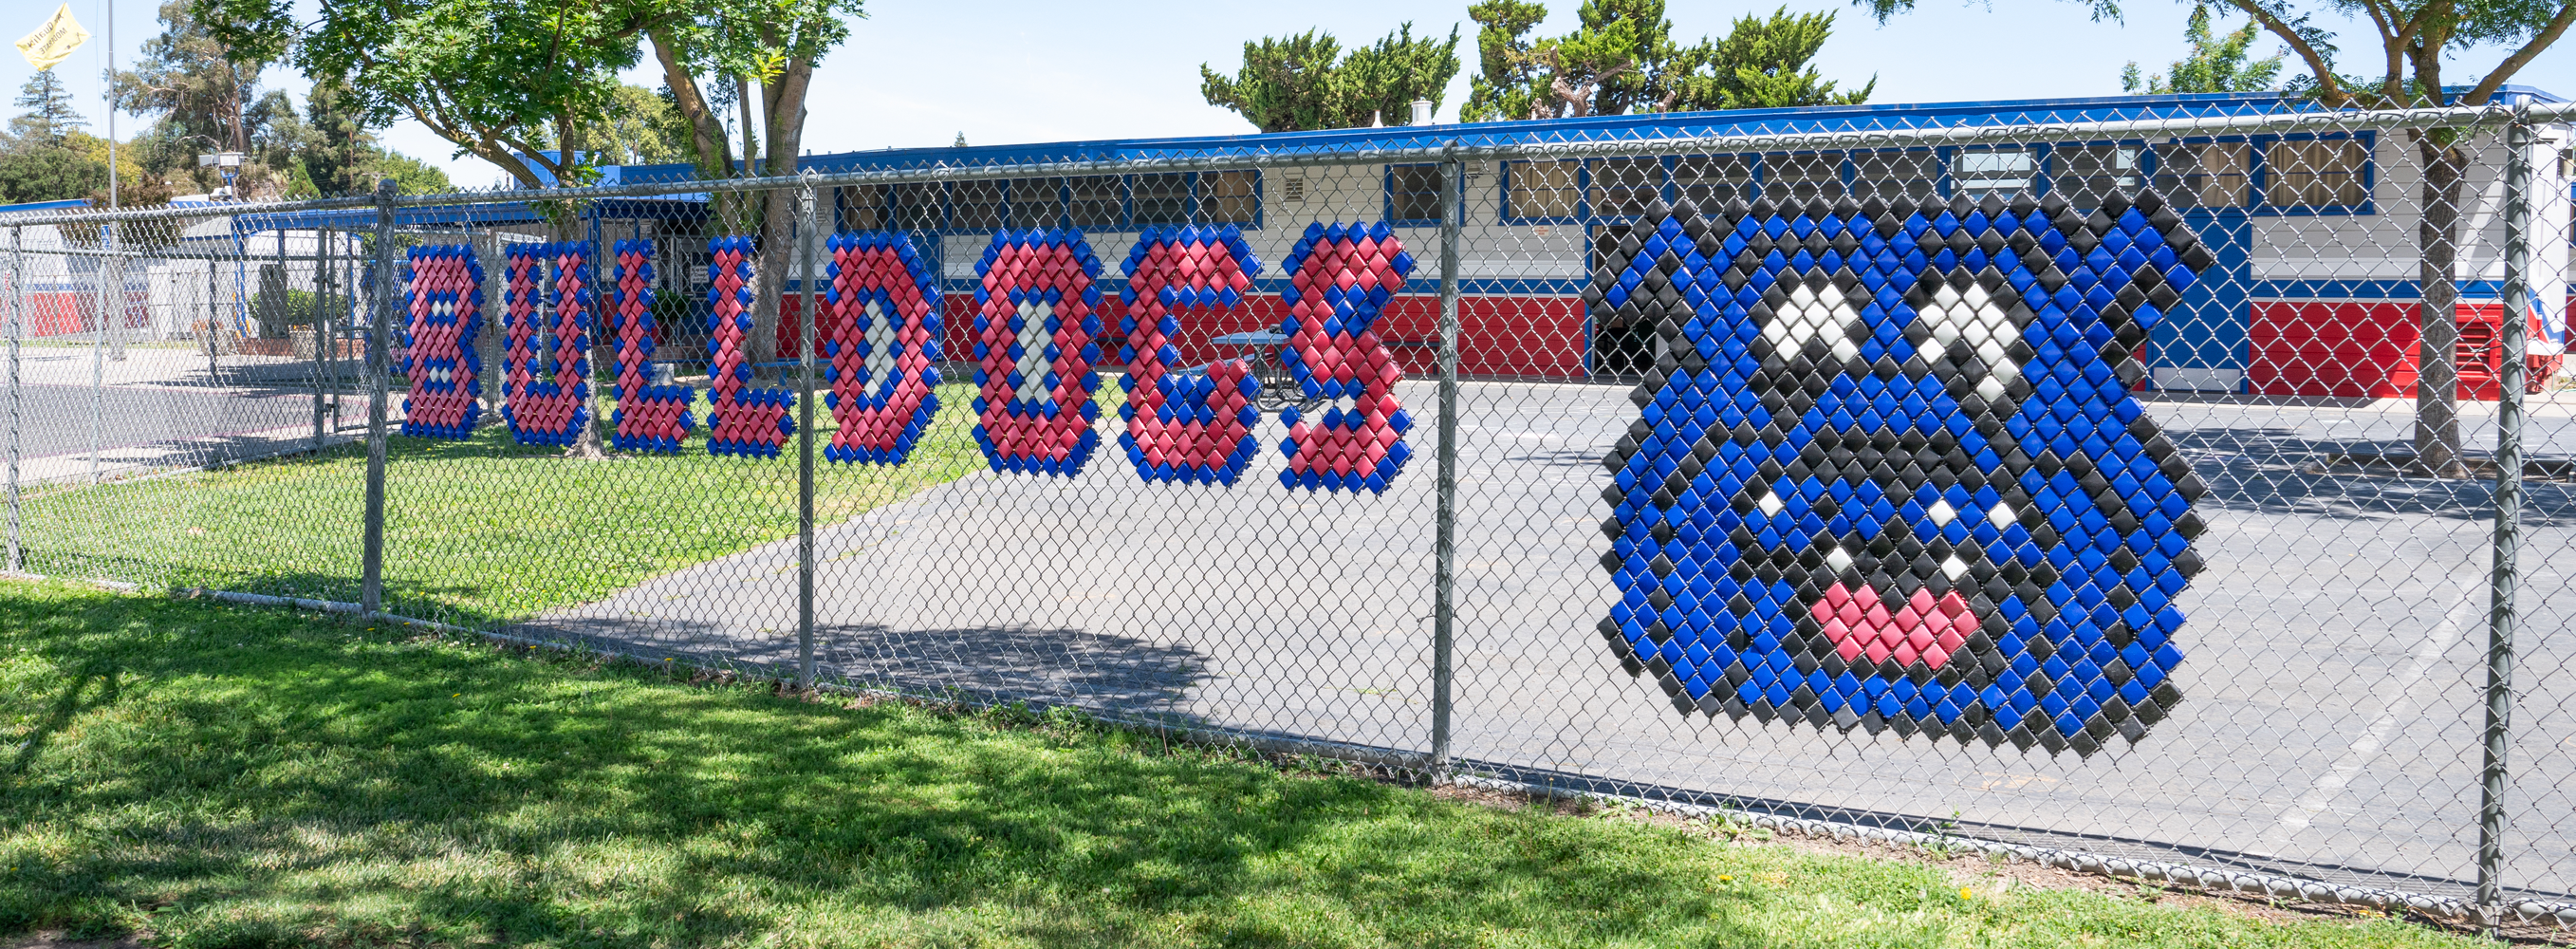 Beard Elementary School with gate decorations reading "Bulldogs" with a bulldog decoration